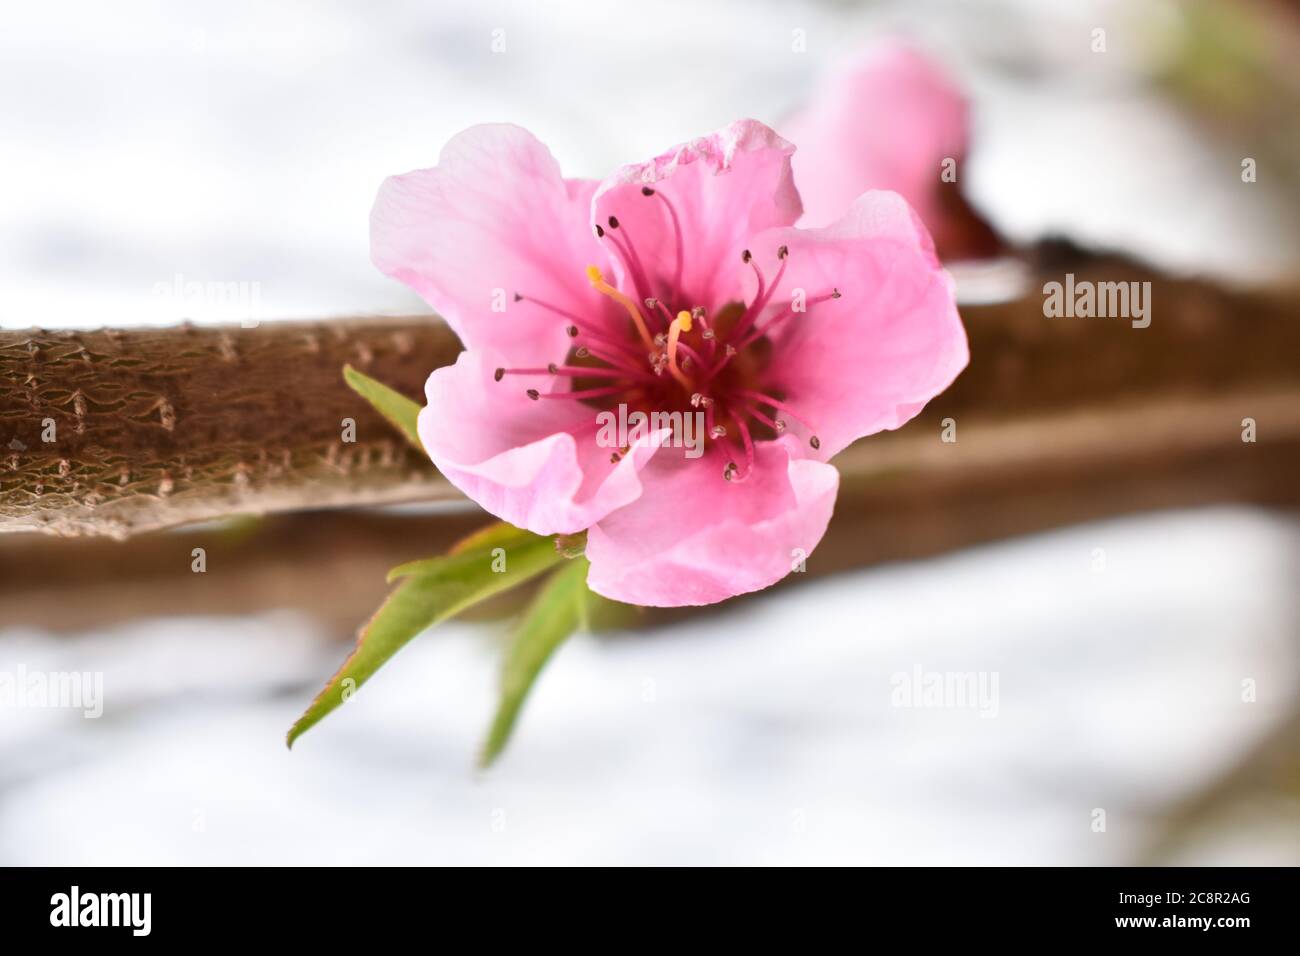 Close up view of a pink blossom on a peach tree in spring Stock Photo